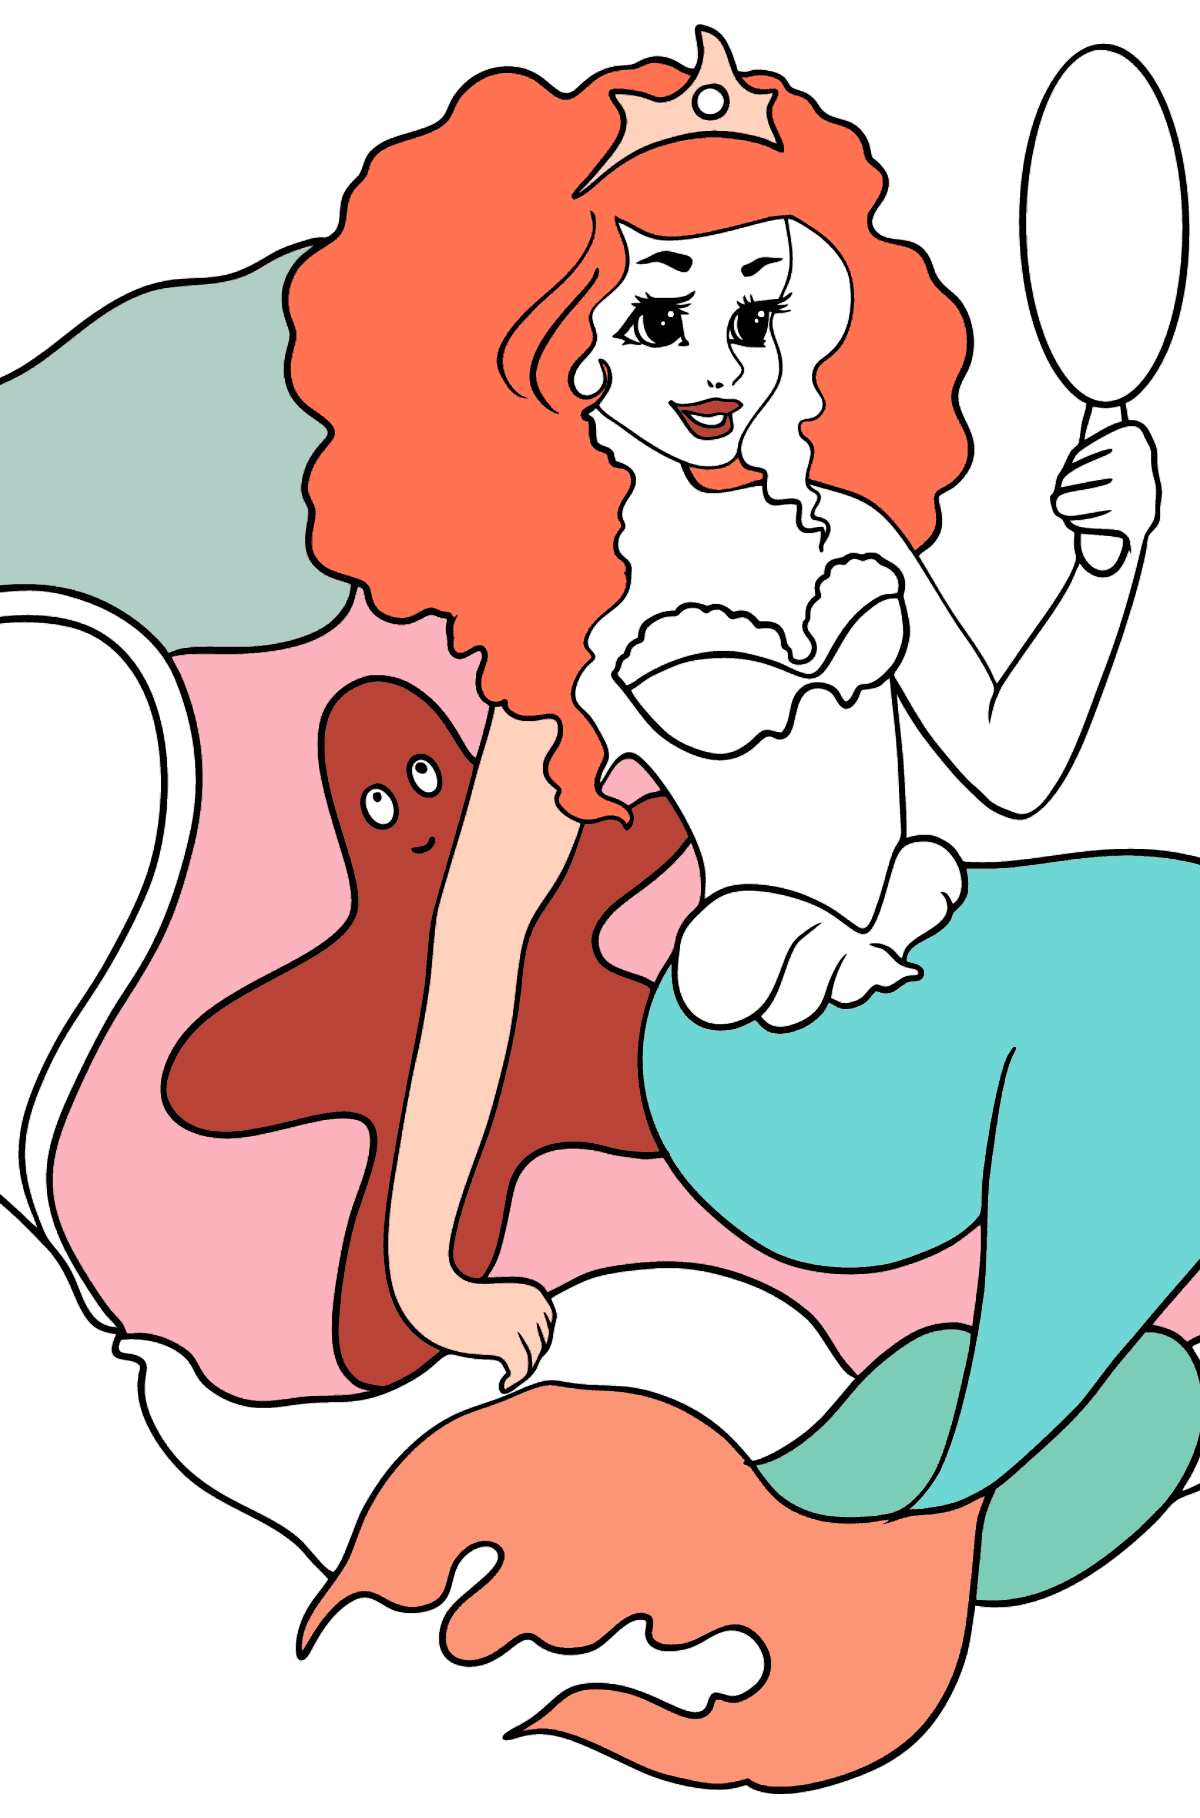 Coloring Page Mermaid with crown - Coloring Pages for Kids